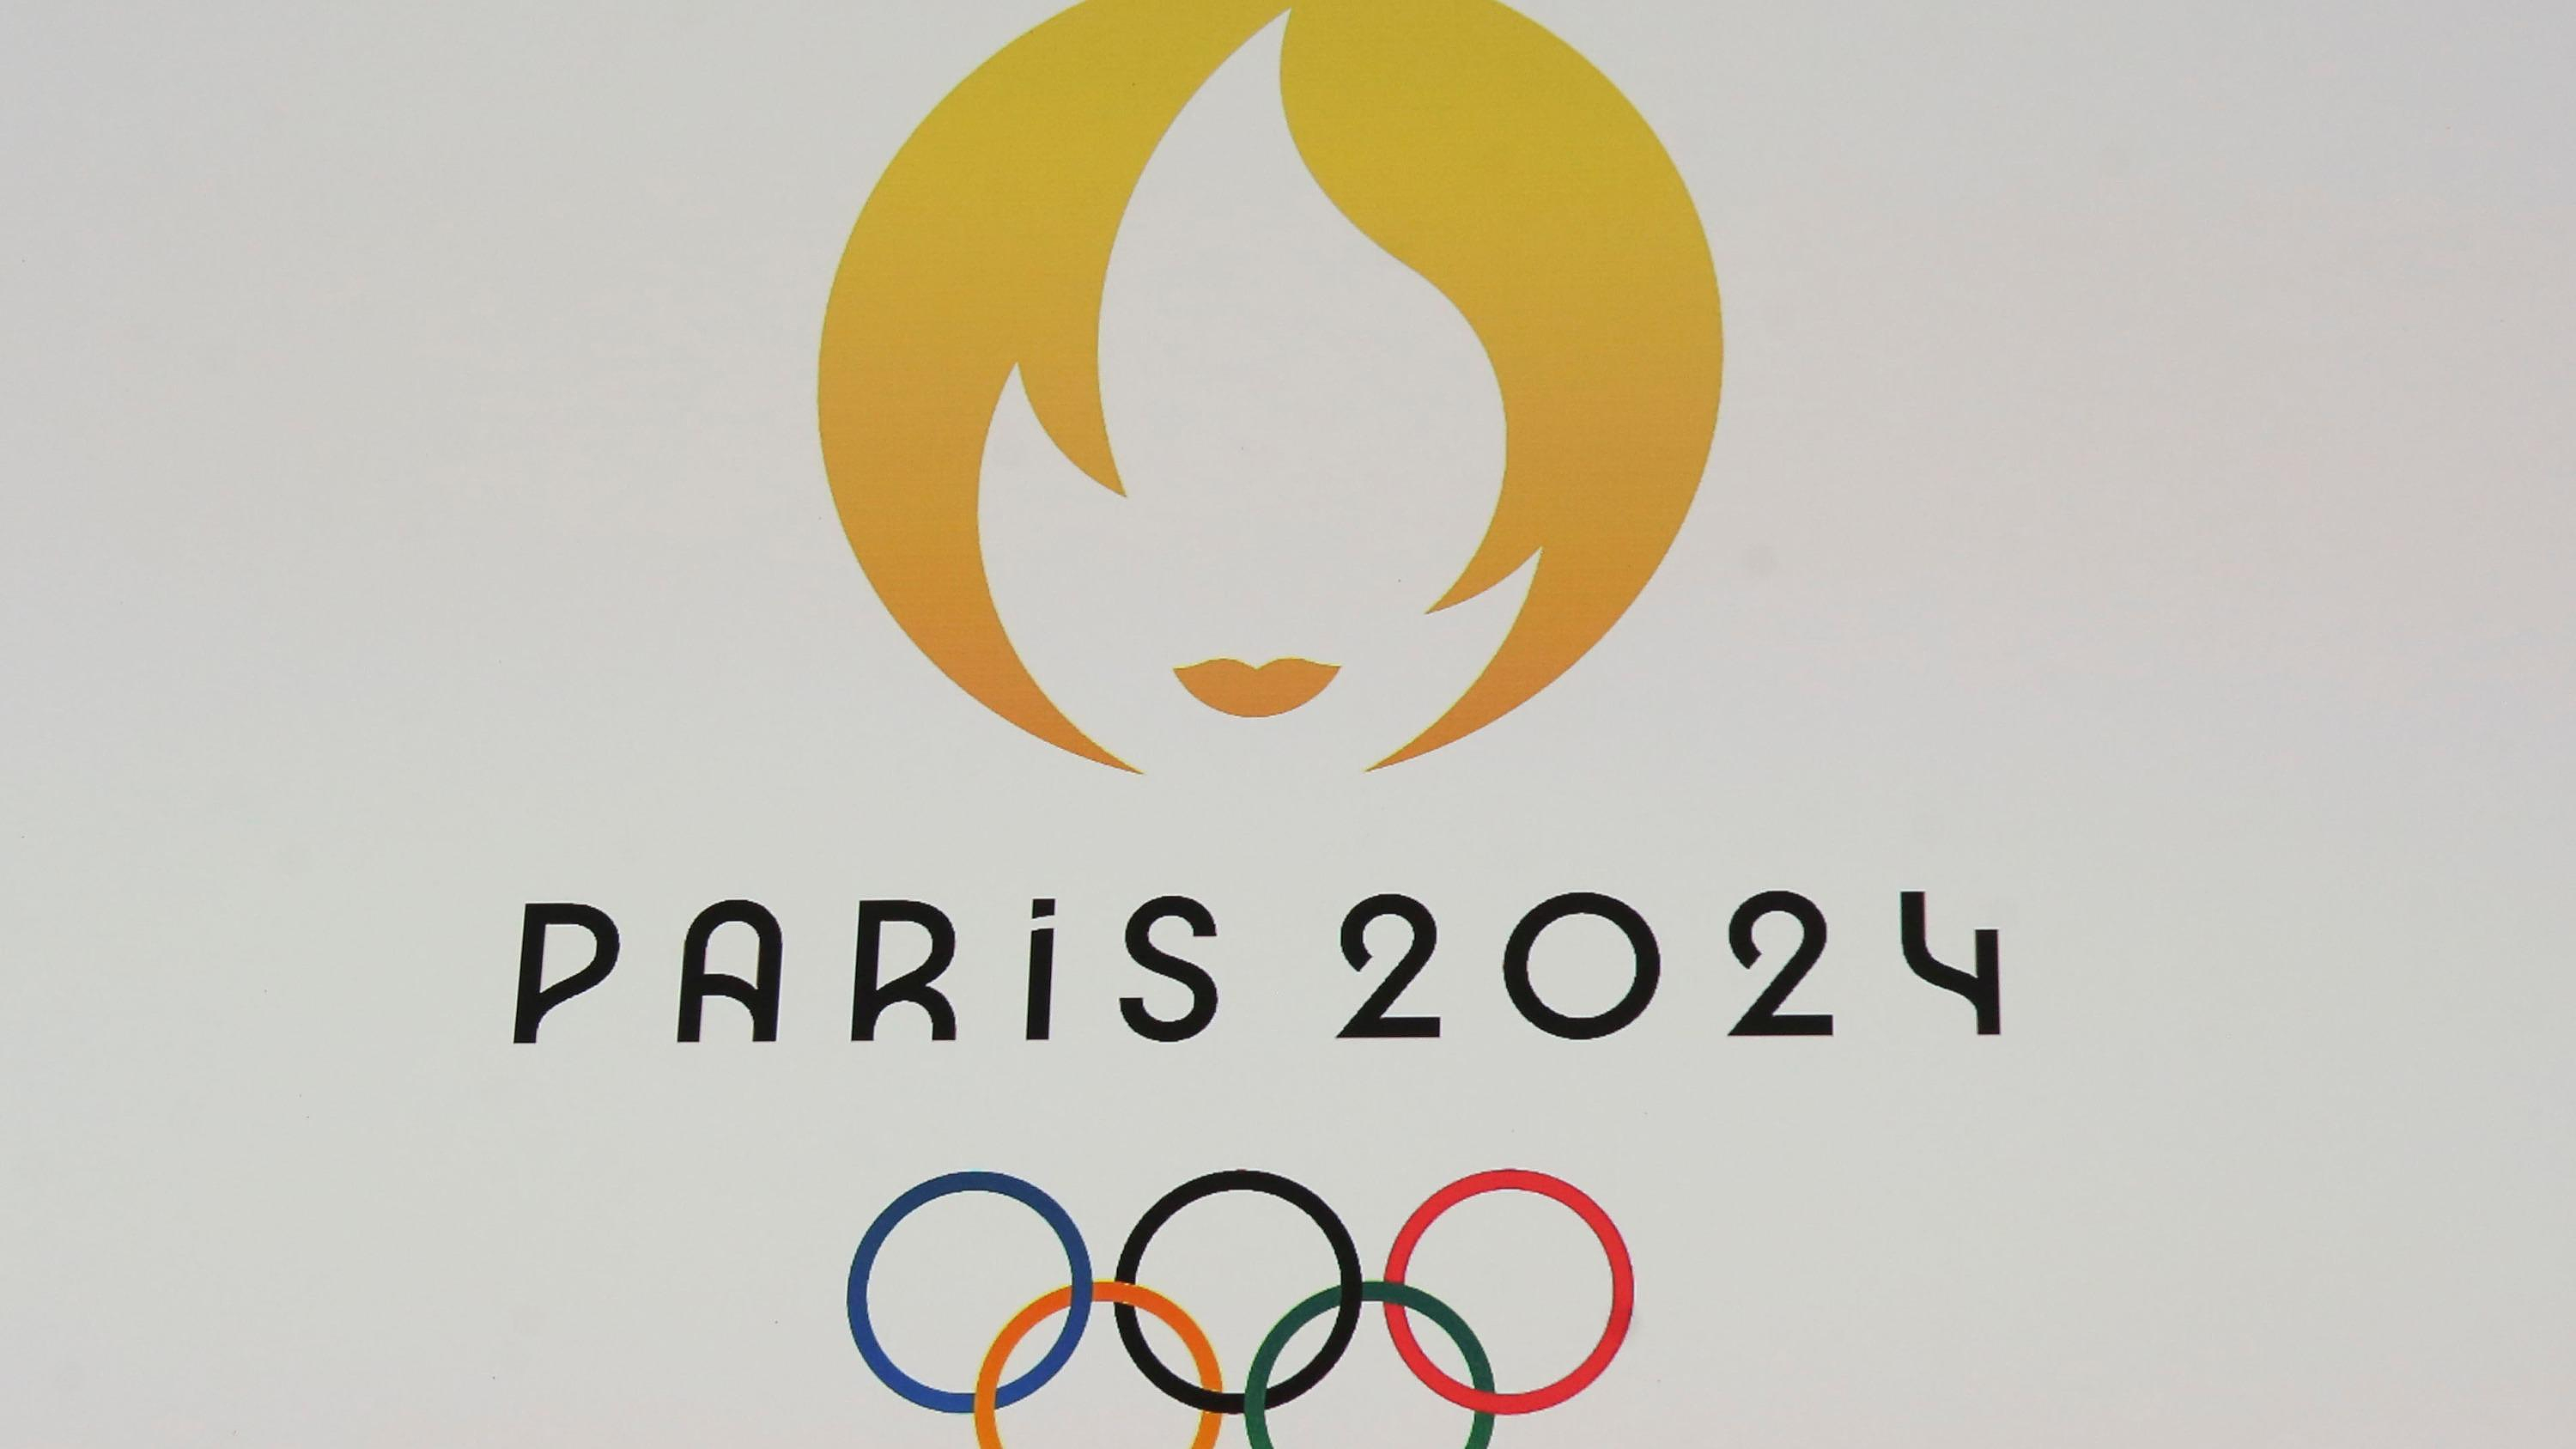 Paris 2024 Olympic Games: “There is no question of considering sanctions” against Israel, assures the IOC